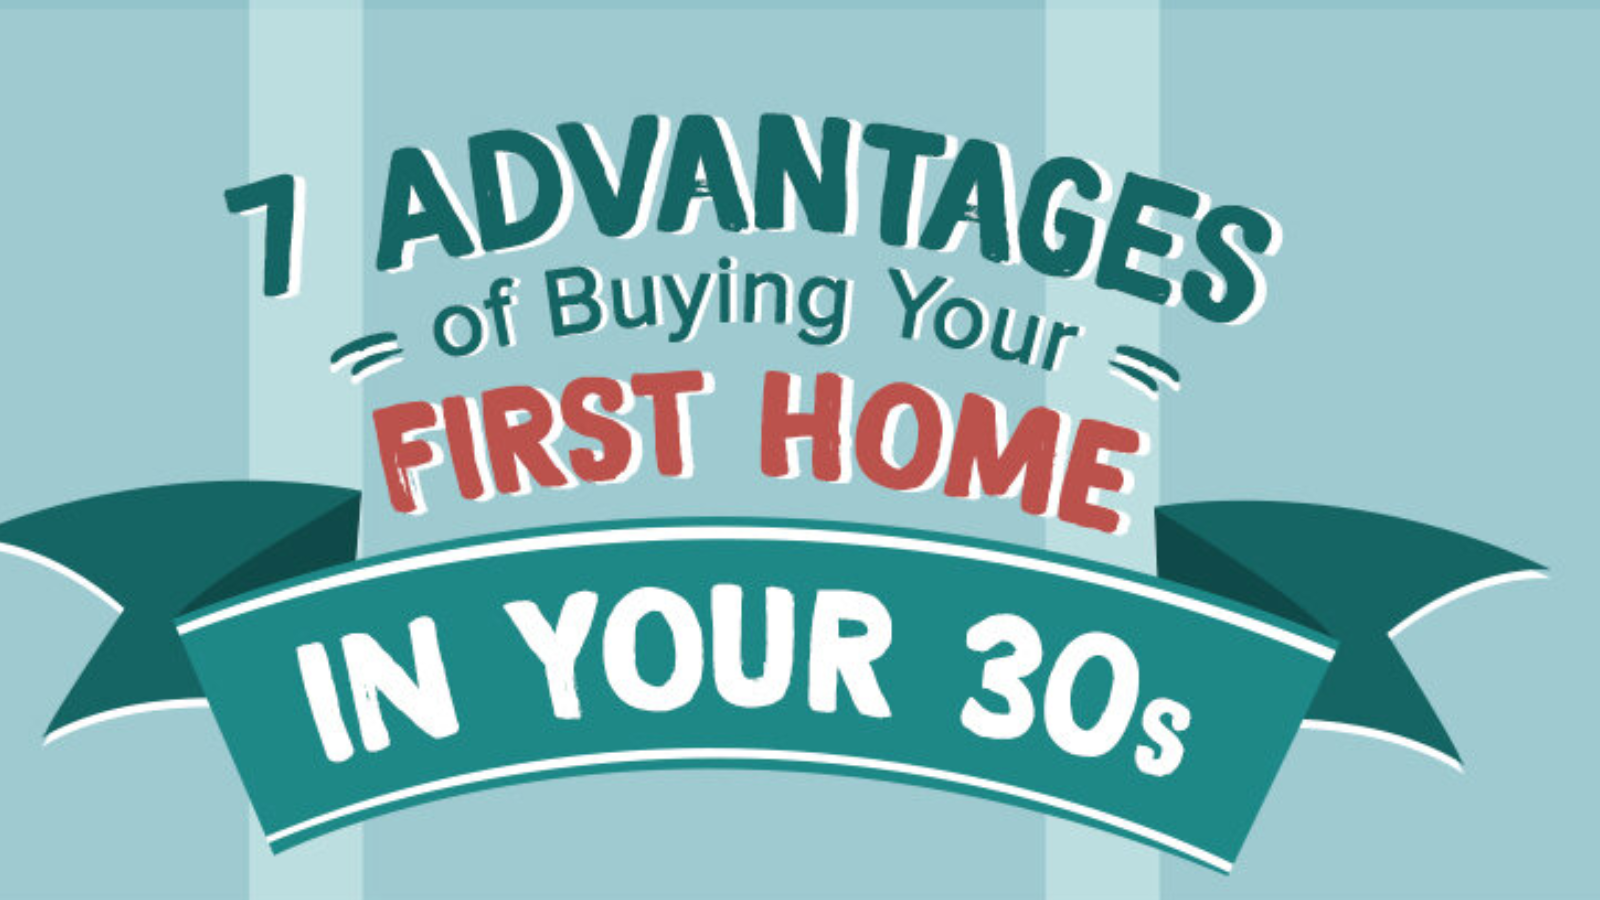 7 Advantages of Buying Your First Home in Silicone Valley Your 30s